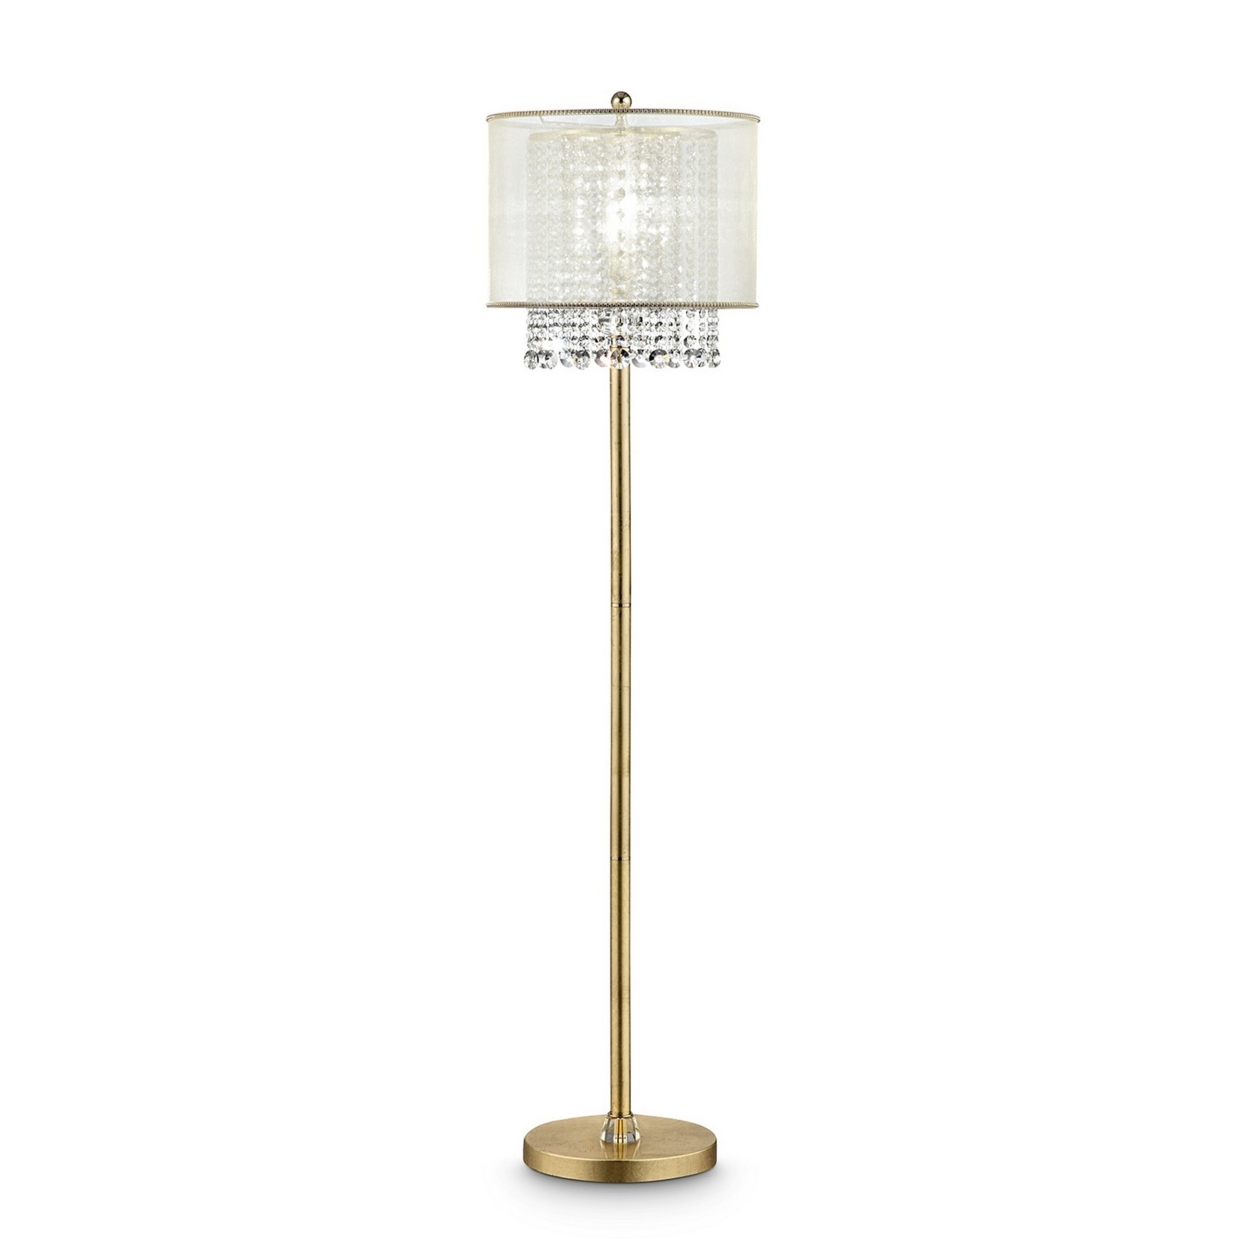 Floor Lamp With Hanging Crystal Accents, White And Gold- Saltoro Sherpi